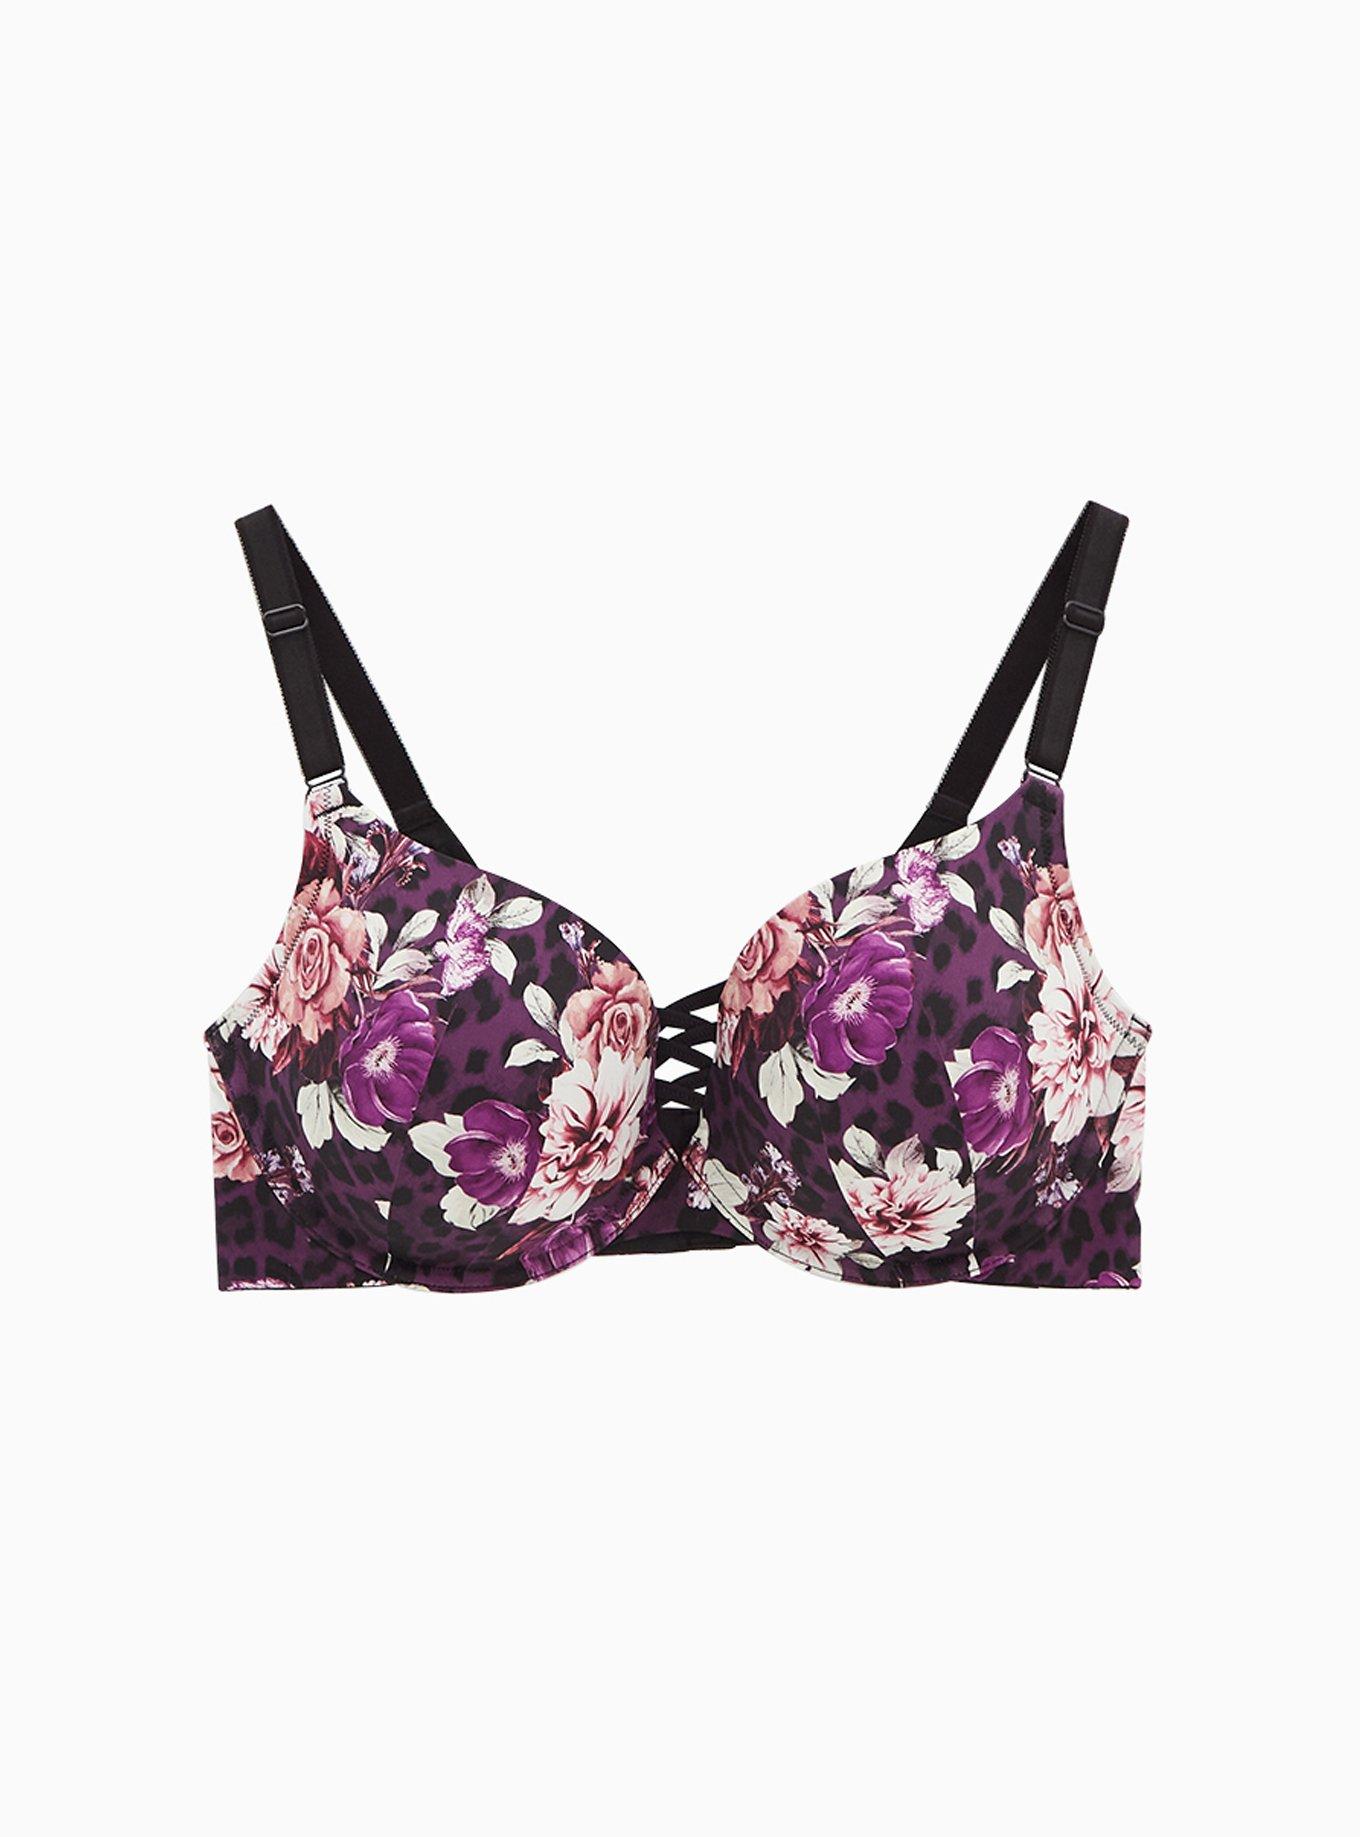 DDD-Sized Shoppers in Their 70s Say This 50%-Off Wireless Bra “Fits Like a  Dream”